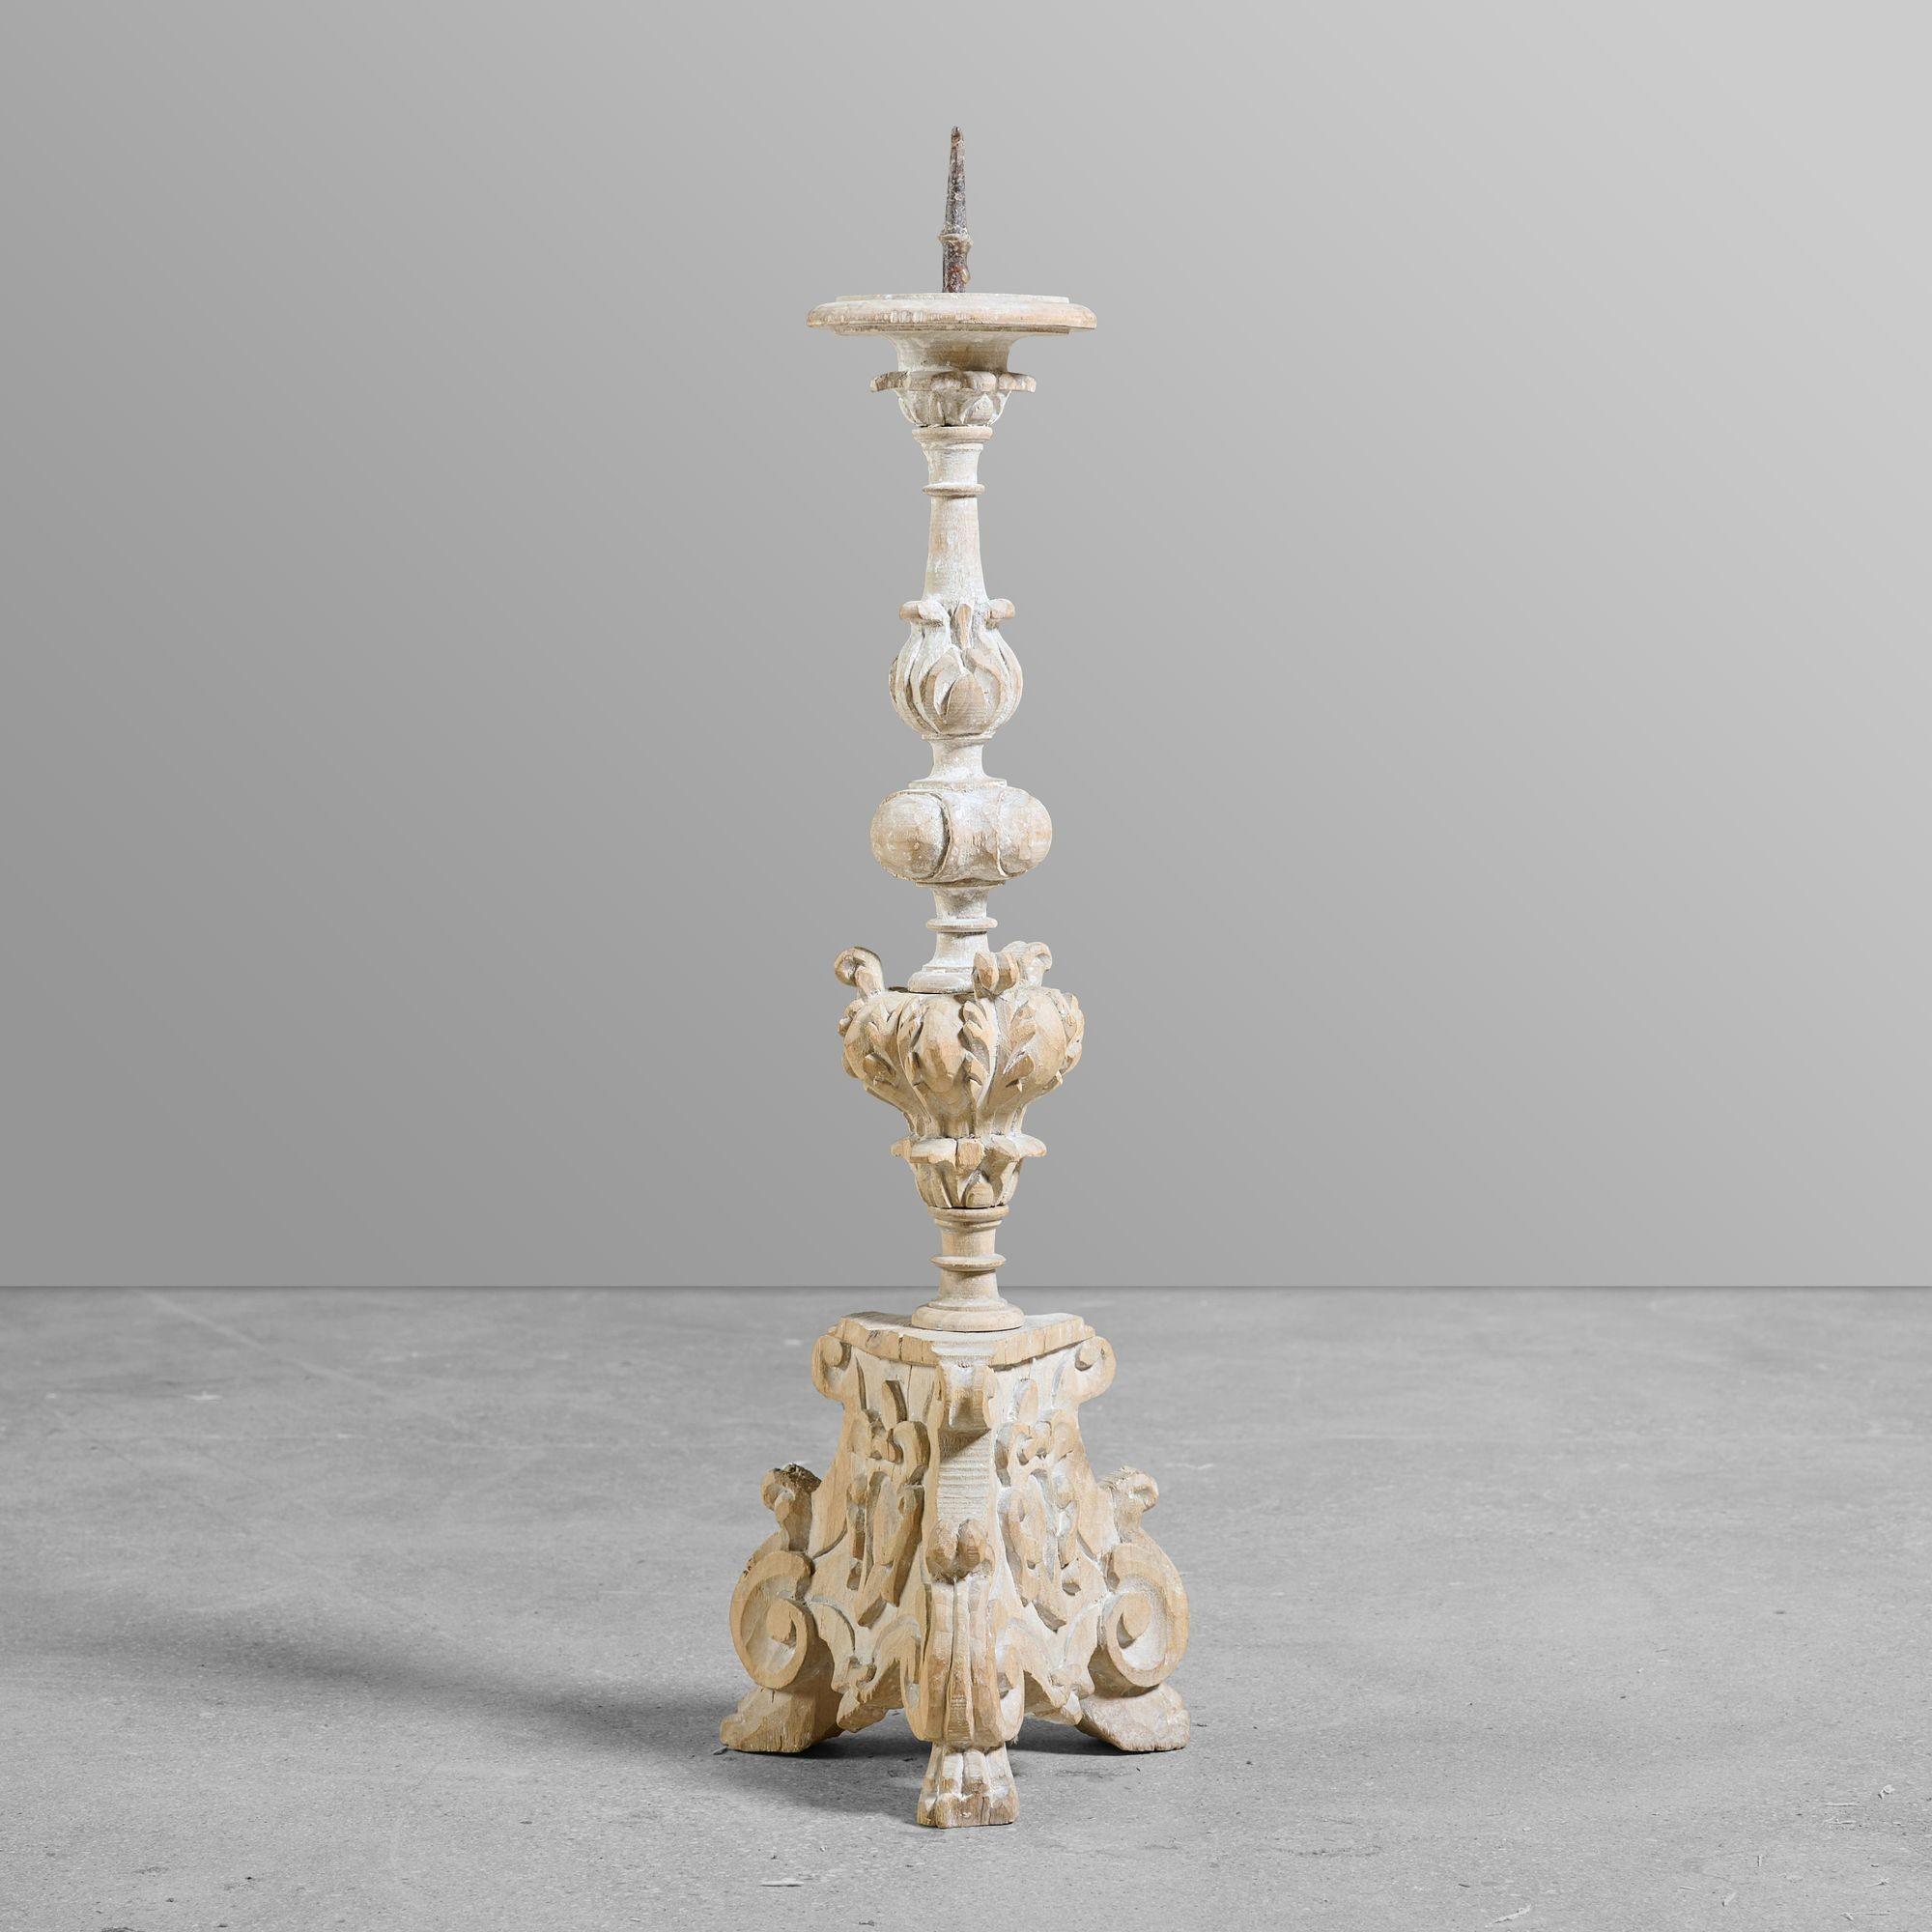 Set of three carved wood and gesso candlesticks with original iron spikes.

